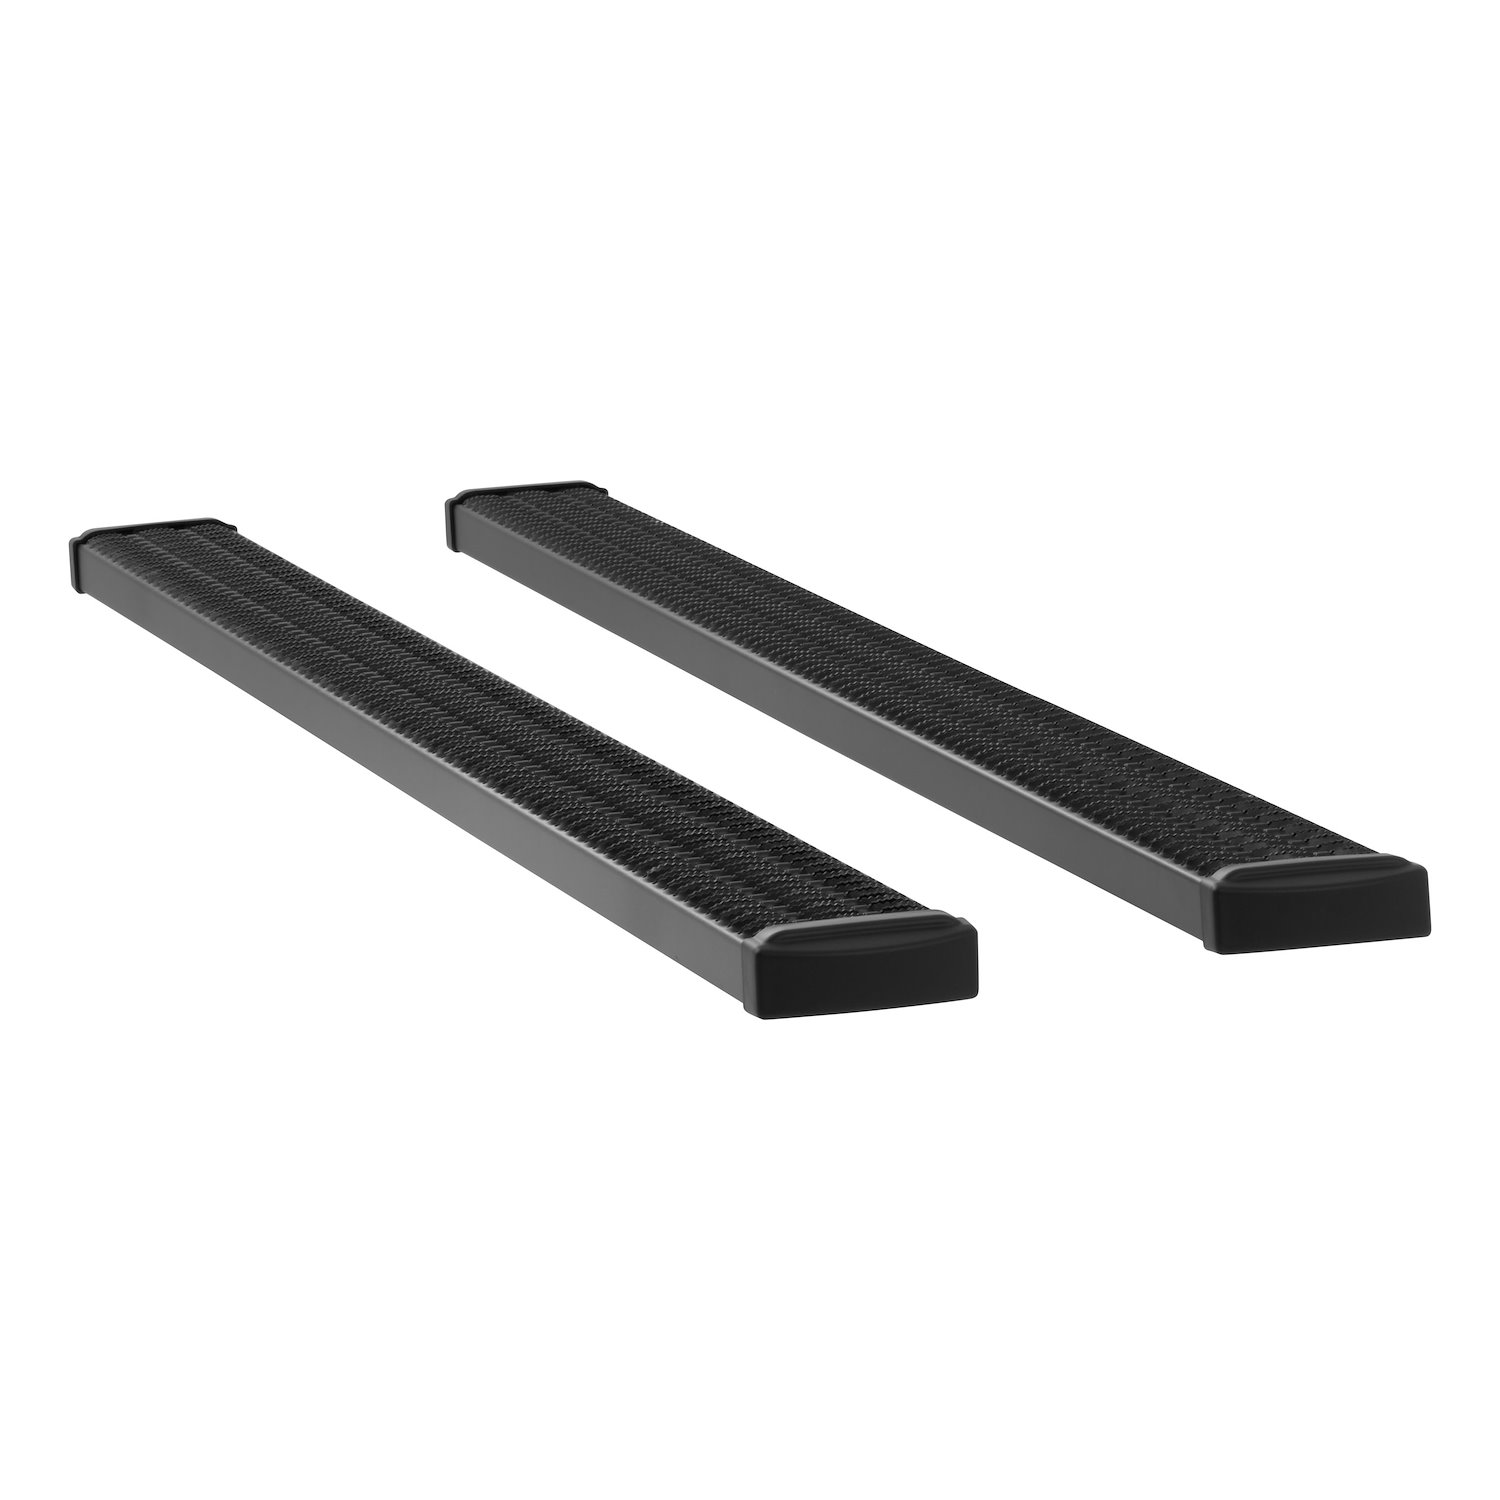 415098-400938 Grip Step 7 in. x 98 in. Aluminum W2W Running Boards Fits Select Dodge, Ram 1500